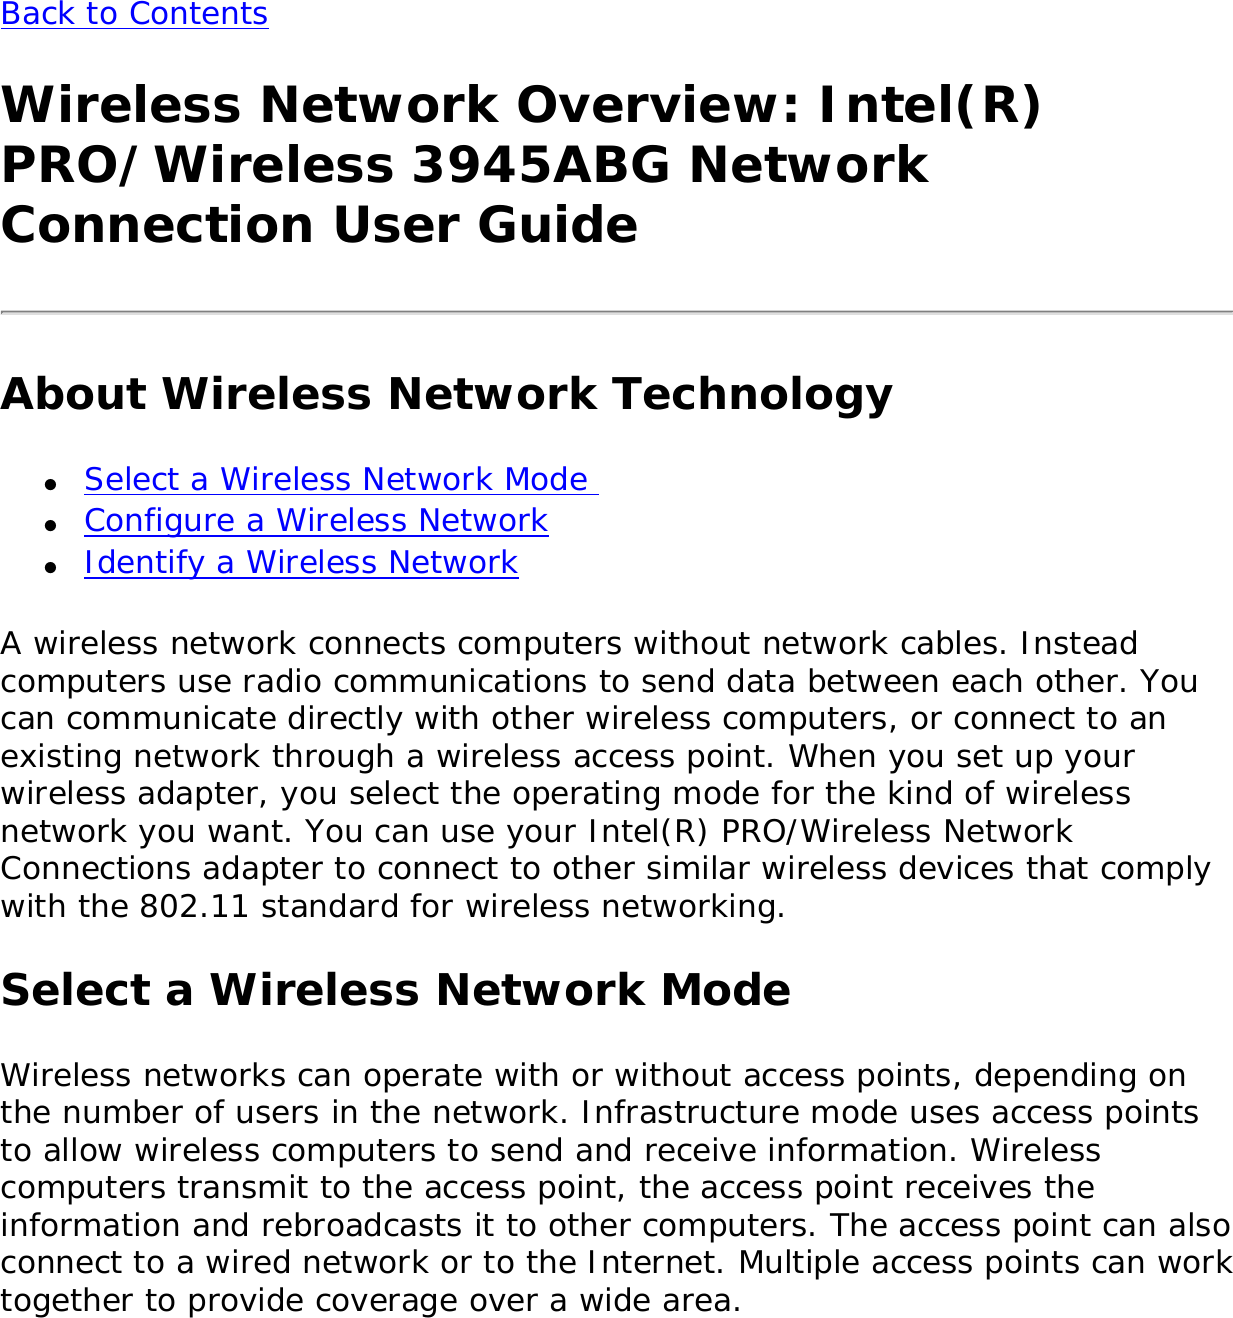 Back to Contents Wireless Network Overview: Intel(R) PRO/Wireless 3945ABG Network Connection User GuideAbout Wireless Network Technology●     Select a Wireless Network Mode ●     Configure a Wireless Network●     Identify a Wireless NetworkA wireless network connects computers without network cables. Instead computers use radio communications to send data between each other. You can communicate directly with other wireless computers, or connect to an existing network through a wireless access point. When you set up your wireless adapter, you select the operating mode for the kind of wireless network you want. You can use your Intel(R) PRO/Wireless Network Connections adapter to connect to other similar wireless devices that comply with the 802.11 standard for wireless networking. Select a Wireless Network ModeWireless networks can operate with or without access points, depending on the number of users in the network. Infrastructure mode uses access points to allow wireless computers to send and receive information. Wireless computers transmit to the access point, the access point receives the information and rebroadcasts it to other computers. The access point can also connect to a wired network or to the Internet. Multiple access points can work together to provide coverage over a wide area. 